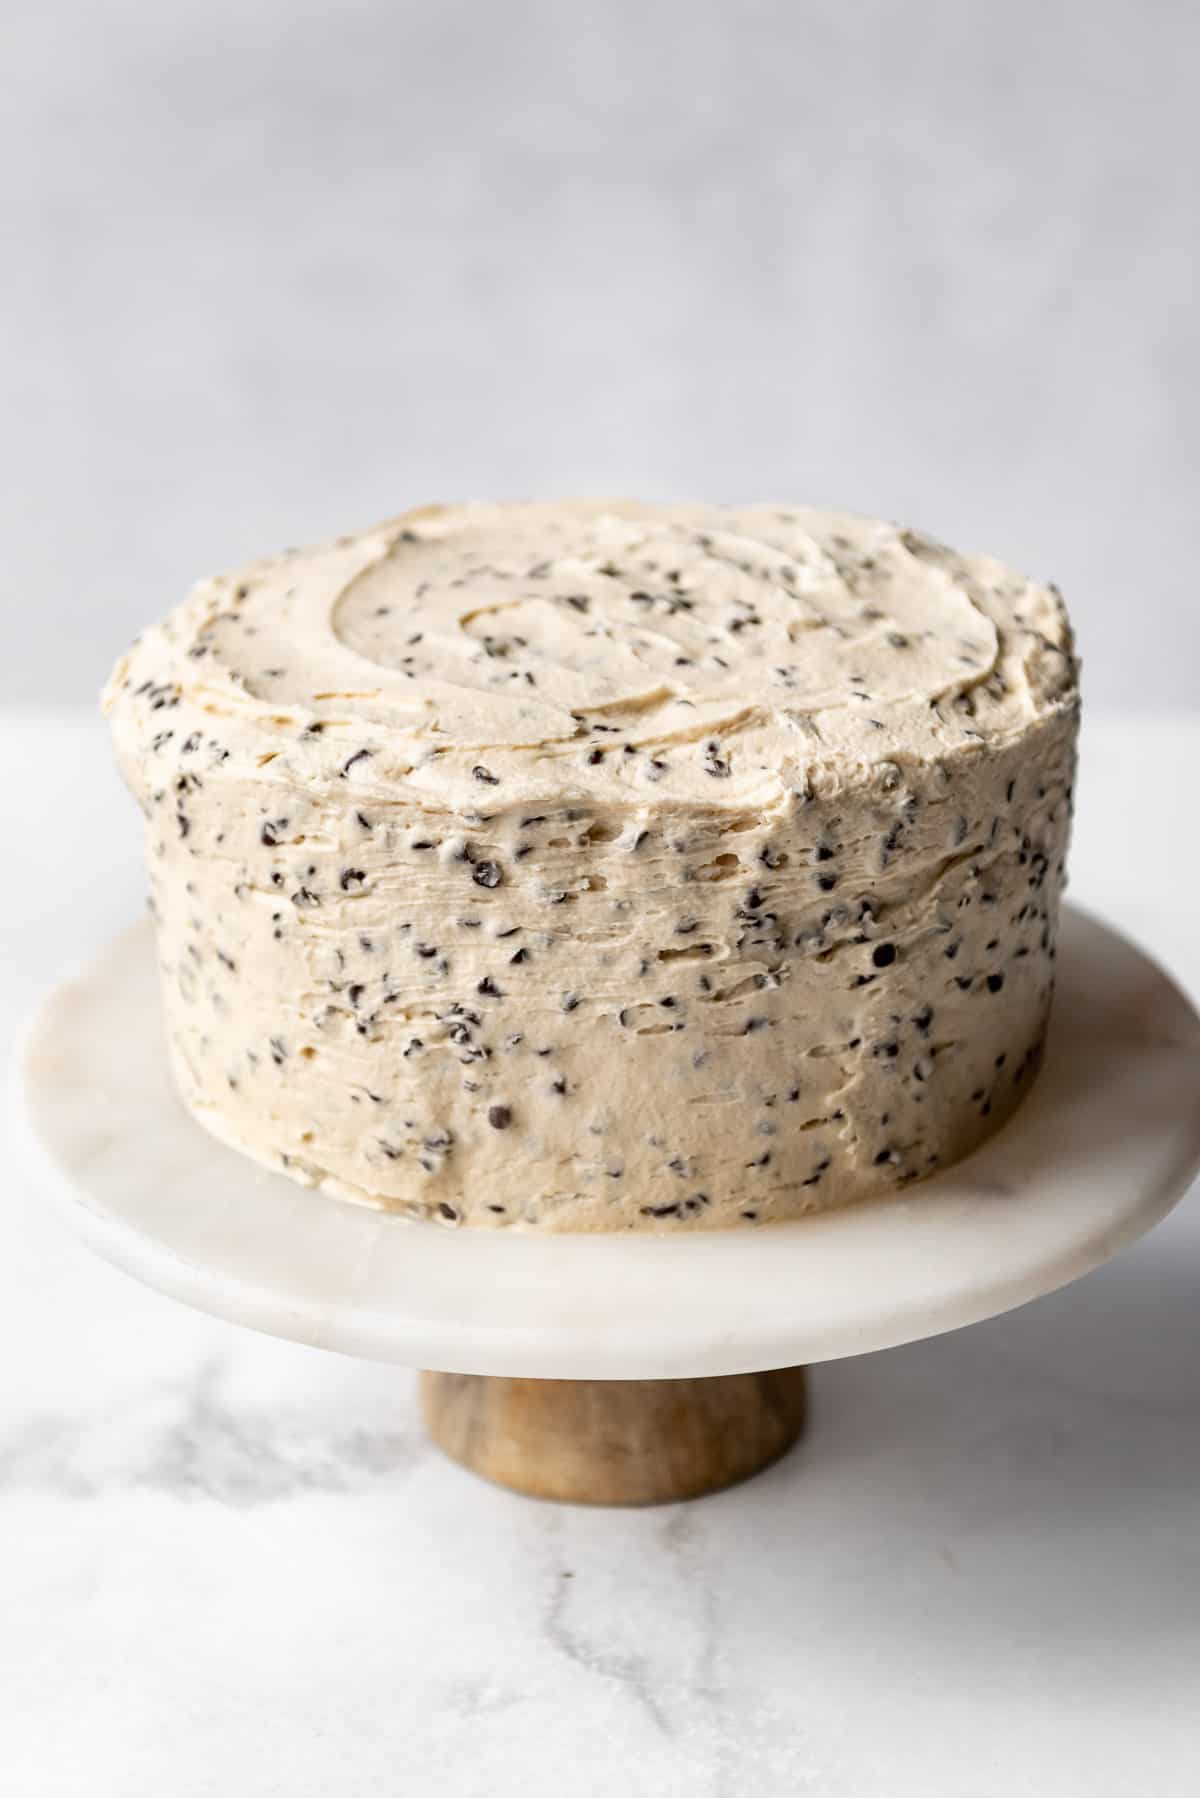 A cake frosted with chocolate chip cookie dough frosting on a white marble cake stand.